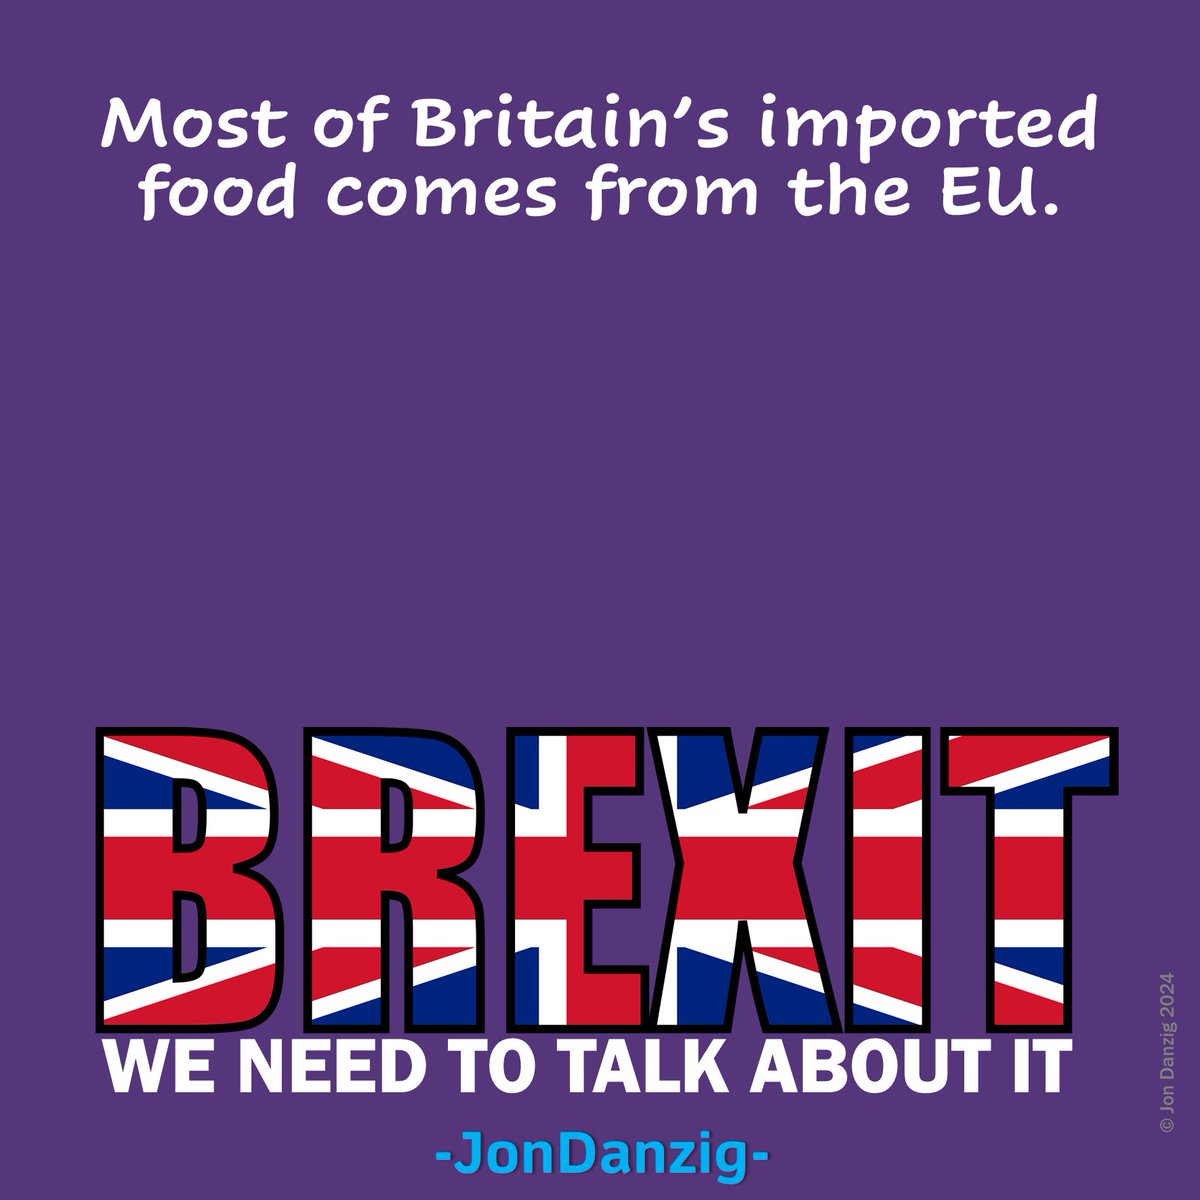 → #Brexit. We need to talk about it. The UK imports almost 50% of its #food and most of that comes from the #EU – more than from anywhere else in the world (by far). How could anyone think that making EU food imports more costly and complicated would make our food cheaper?